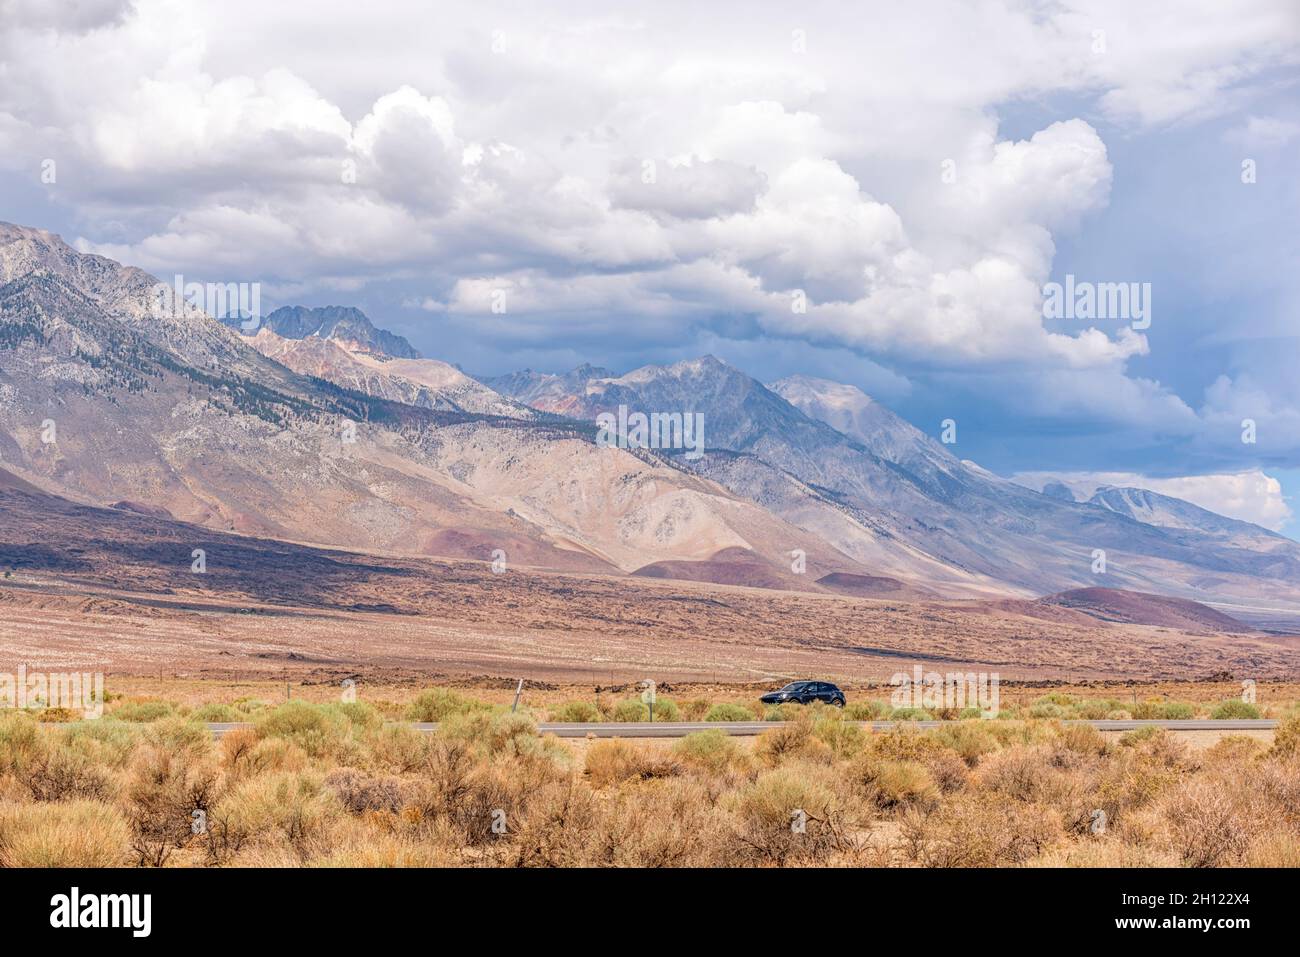 Scenic landscape of the Eastern Sierra mountains along US Route 395. About 30 minutes outside of Bishop, CA, USA. Stock Photo